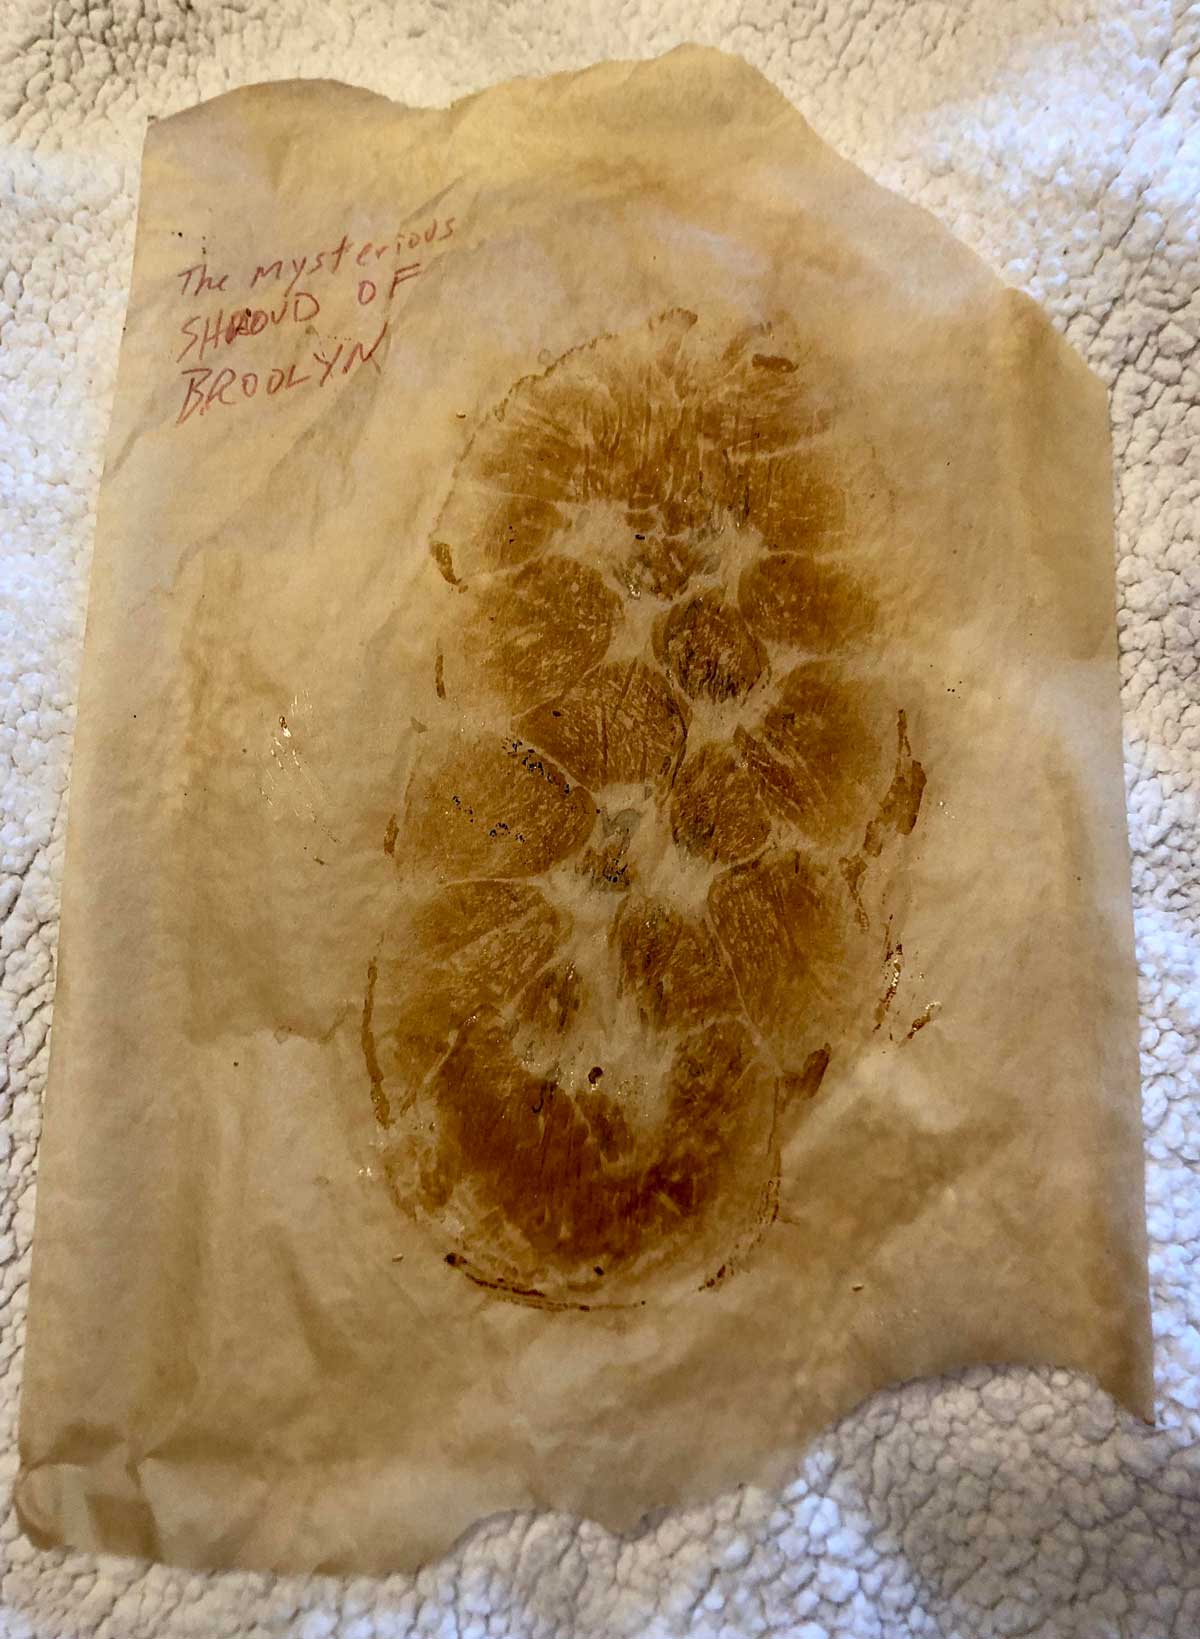 I baked a Challah and it stained the parchment paper. My dad wrote a caption on it